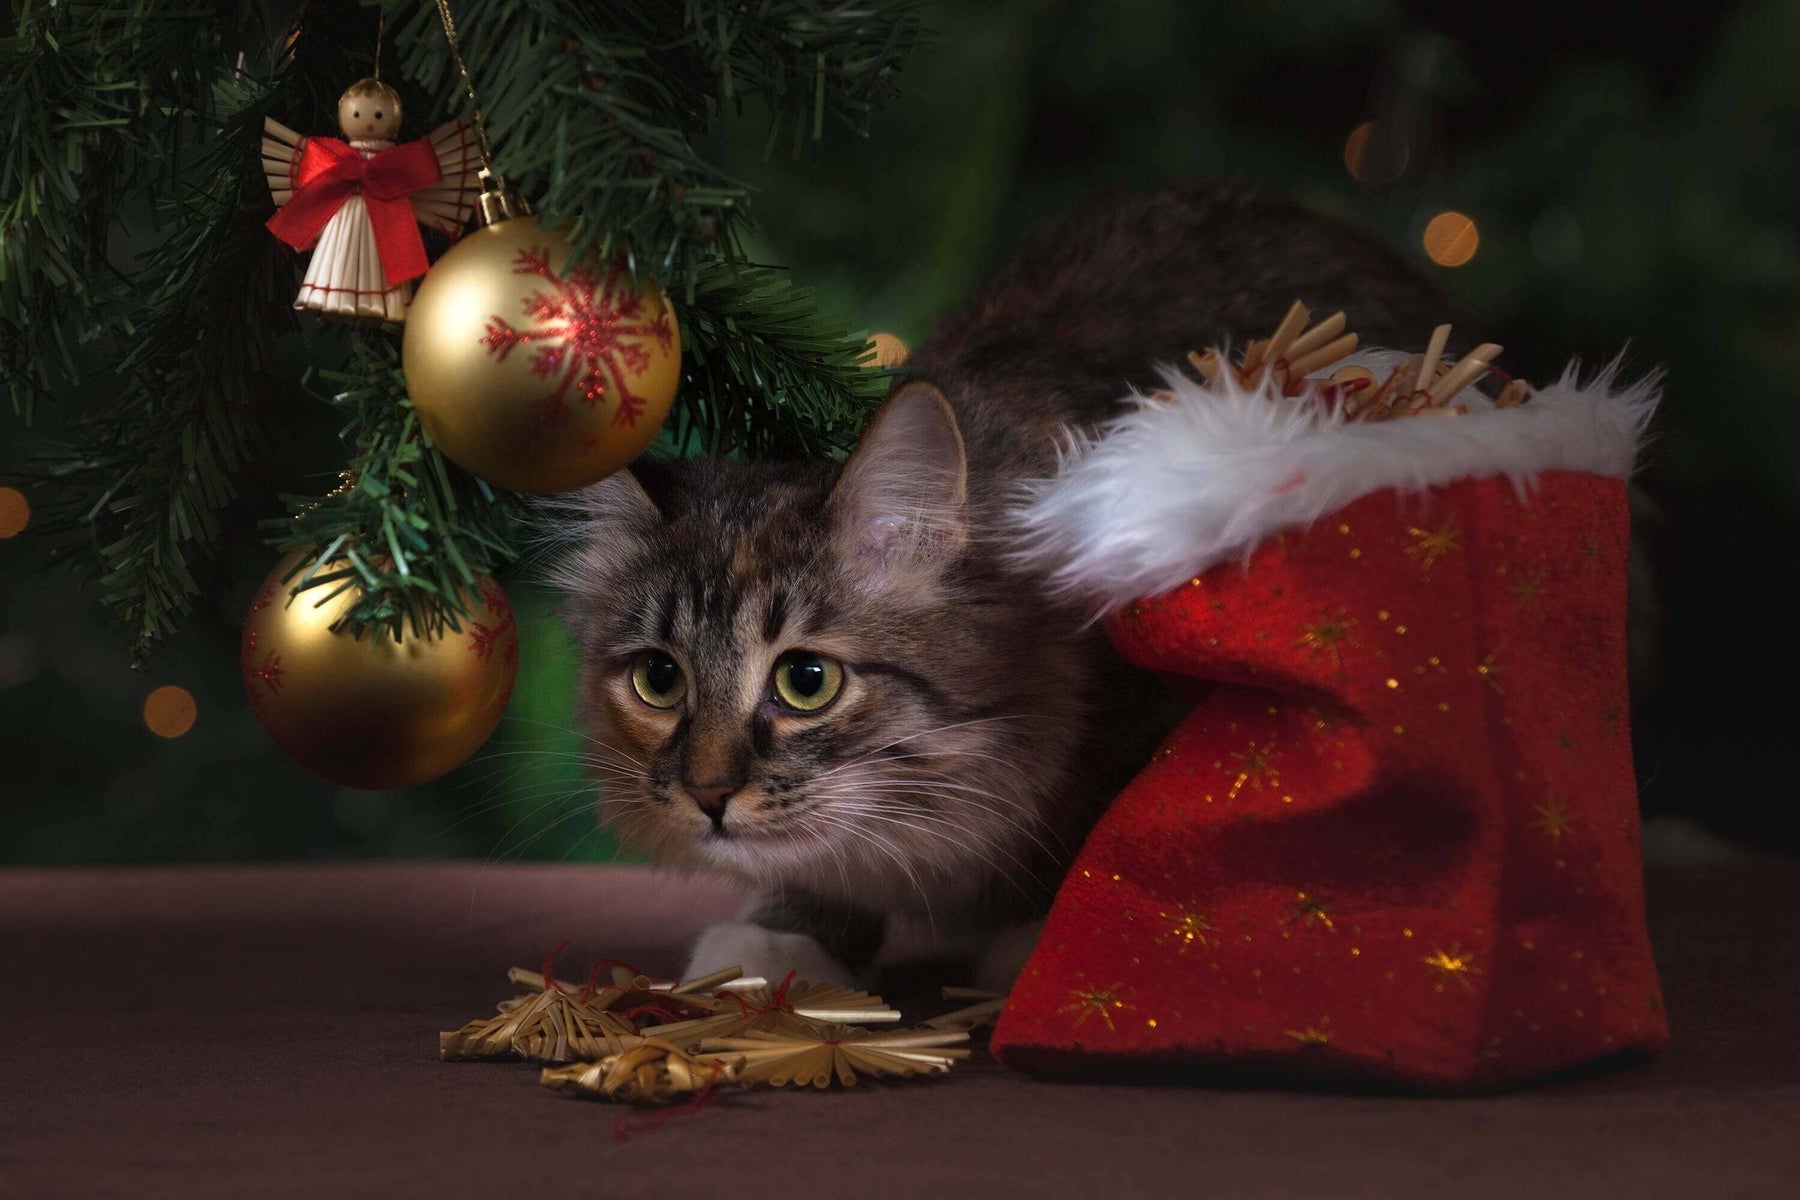 Cat next to red stocking underneath a Christmas tree